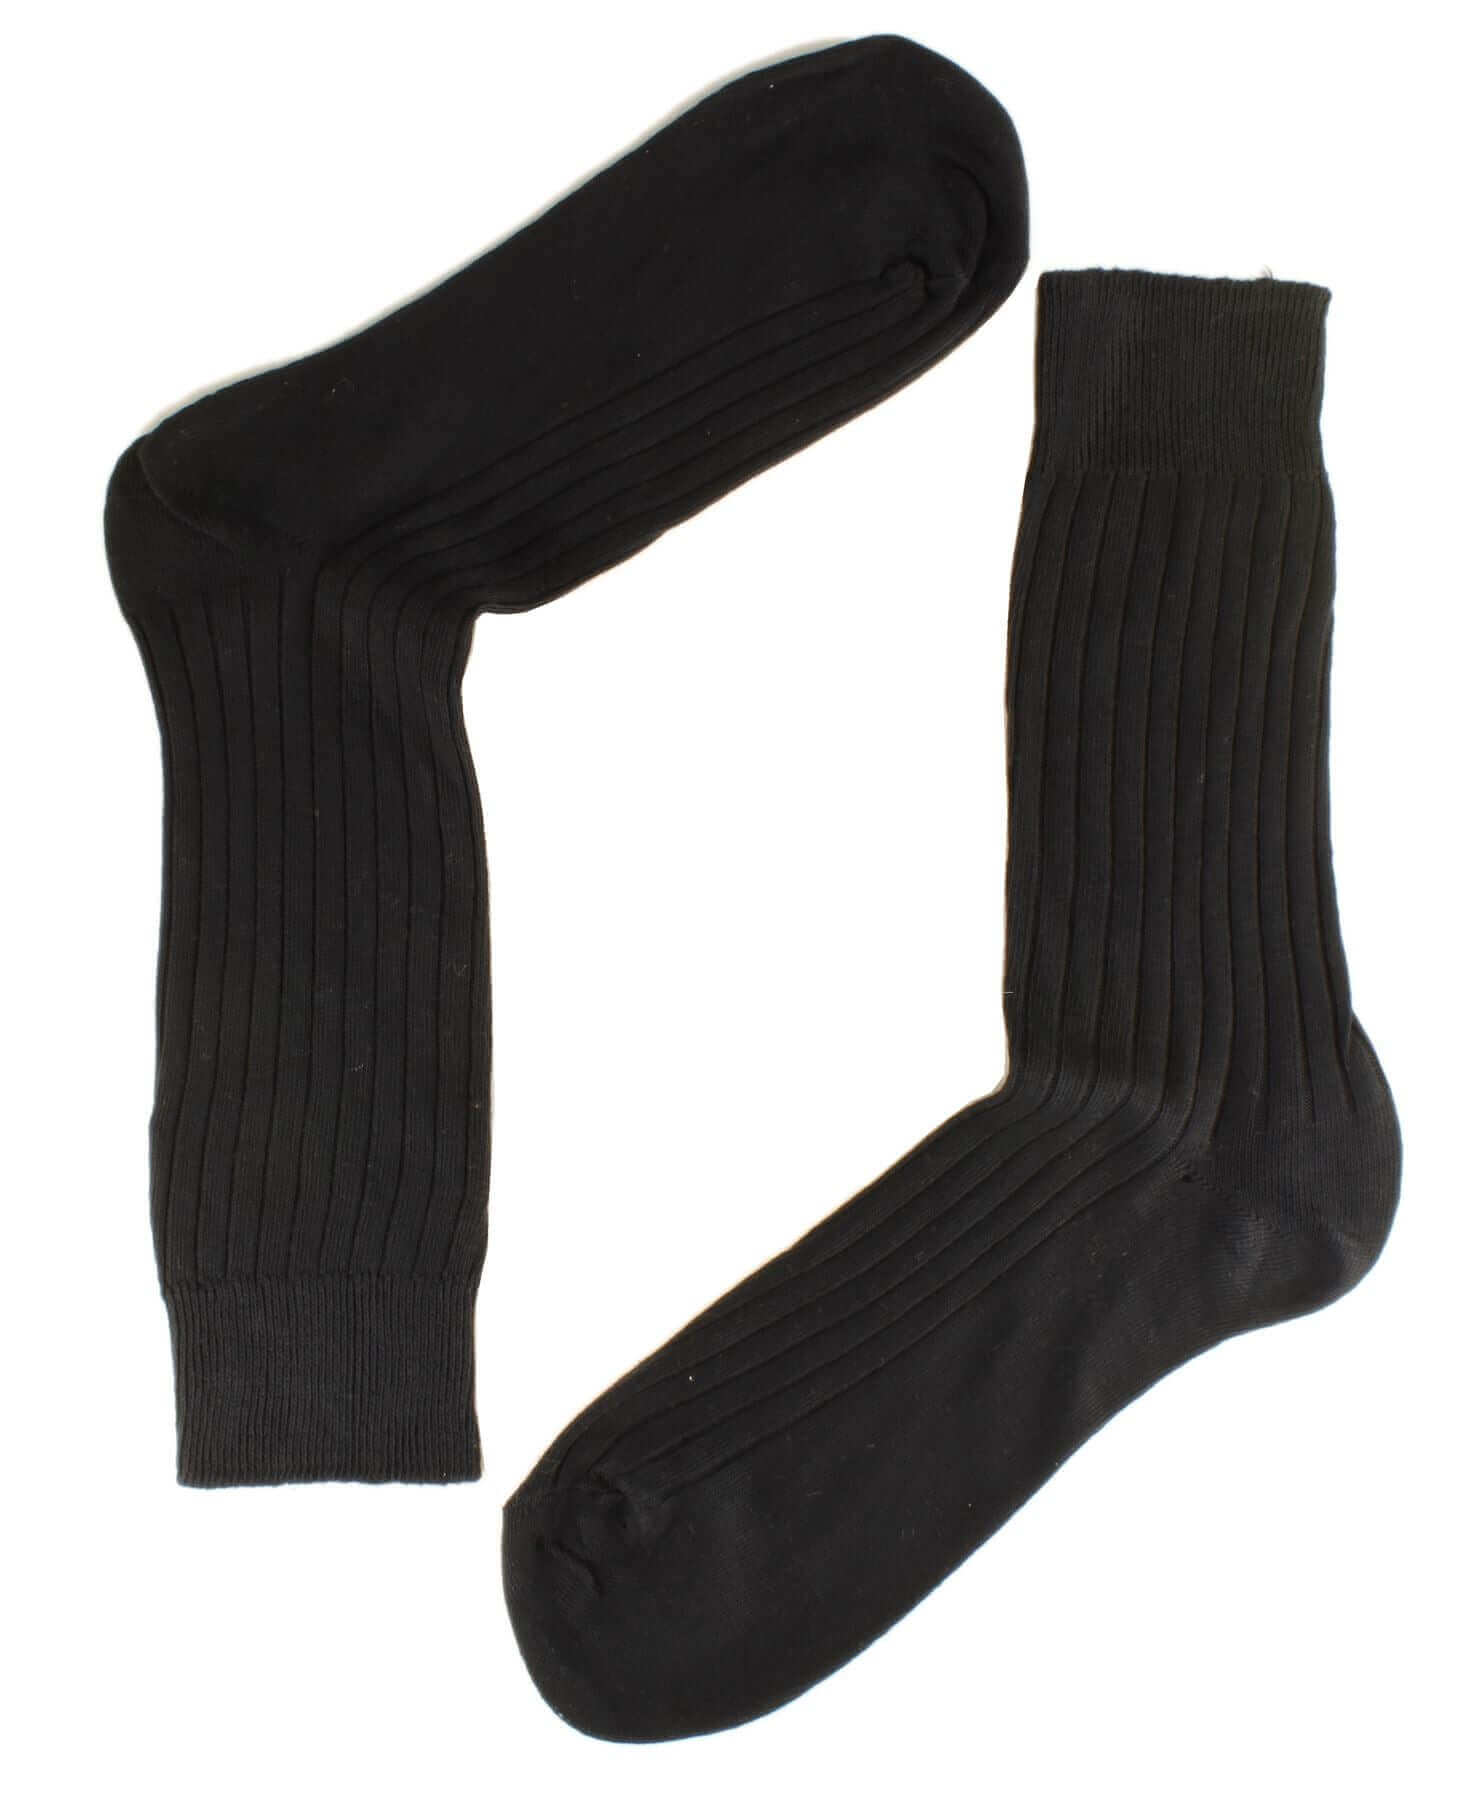 12 Pairs Men's Ribbed 100% Cotton Socks, Seam Free Toe Dress Socks. Buy now for £9.00. A Socks by Sock Stack. 6-11, assorted, black, black socks, boot, boot socks, boys socks, breathable, brown, comfortable, cosy, cotton, cycling, footwear, grey, hiking,